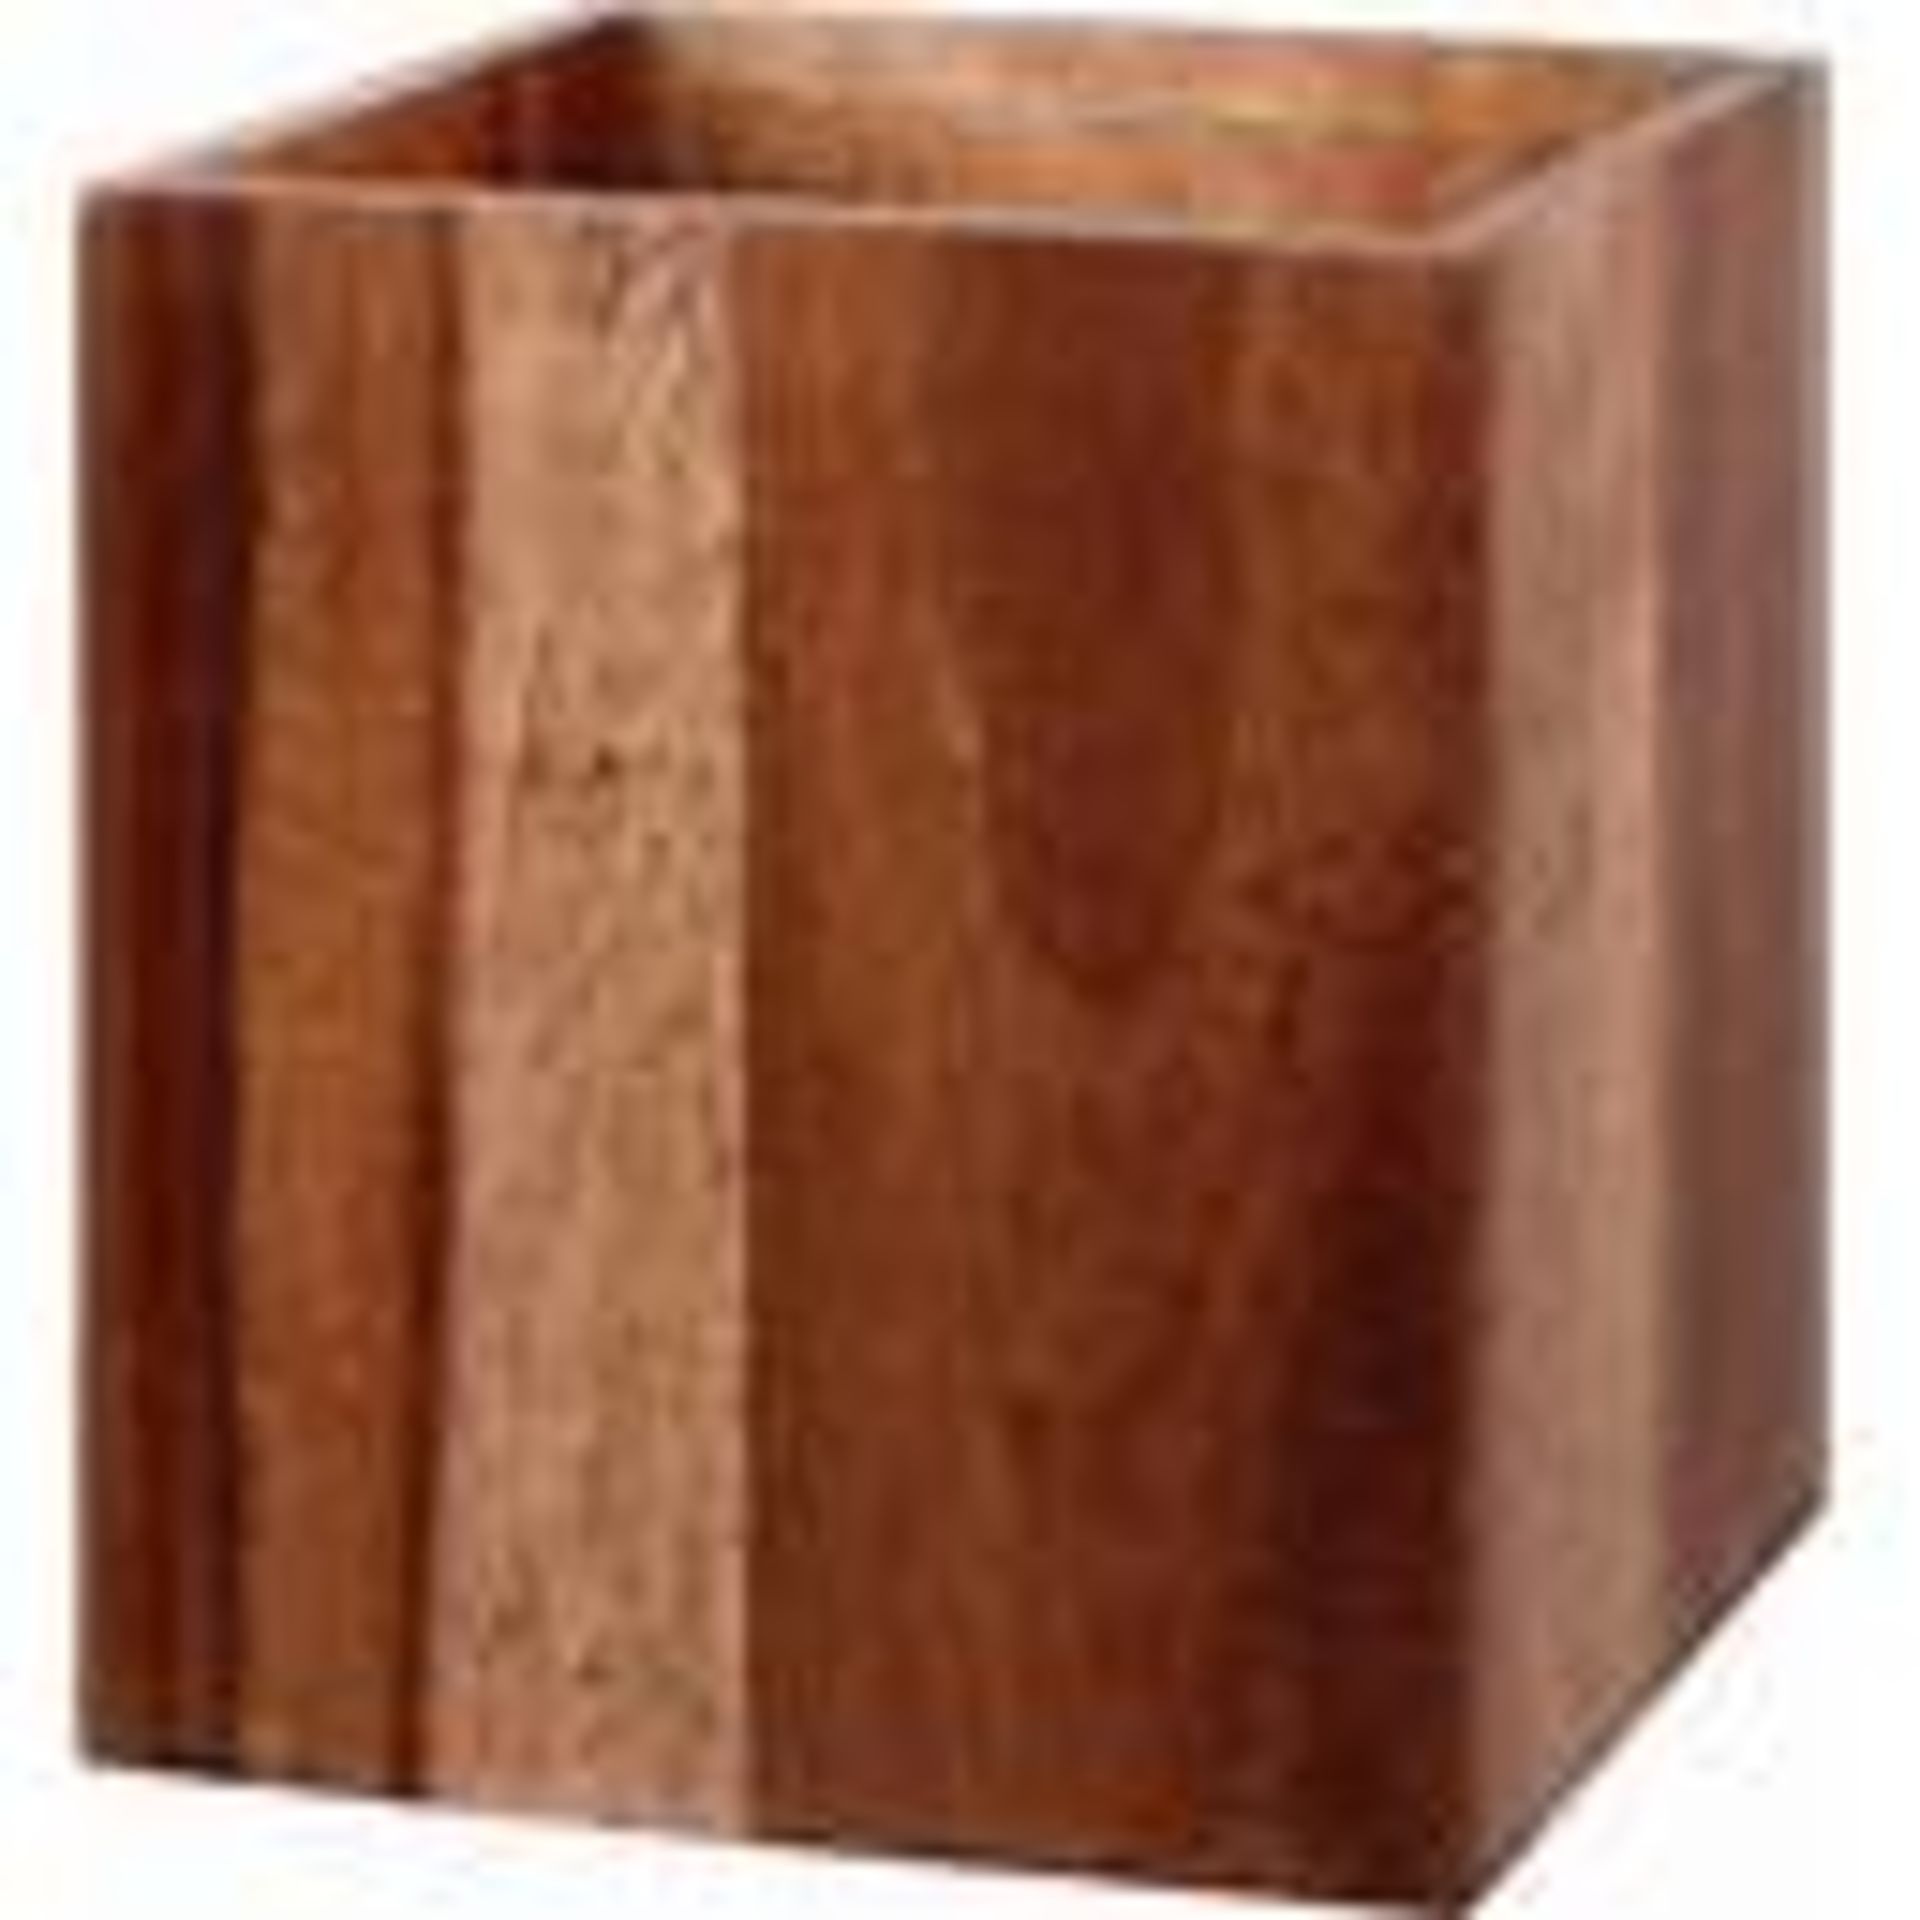 3 X BRAND NEW PACKS OF 2 CHURCHILL BUFFET LARGE WOODEN CUBES RRP £80 PER PACK